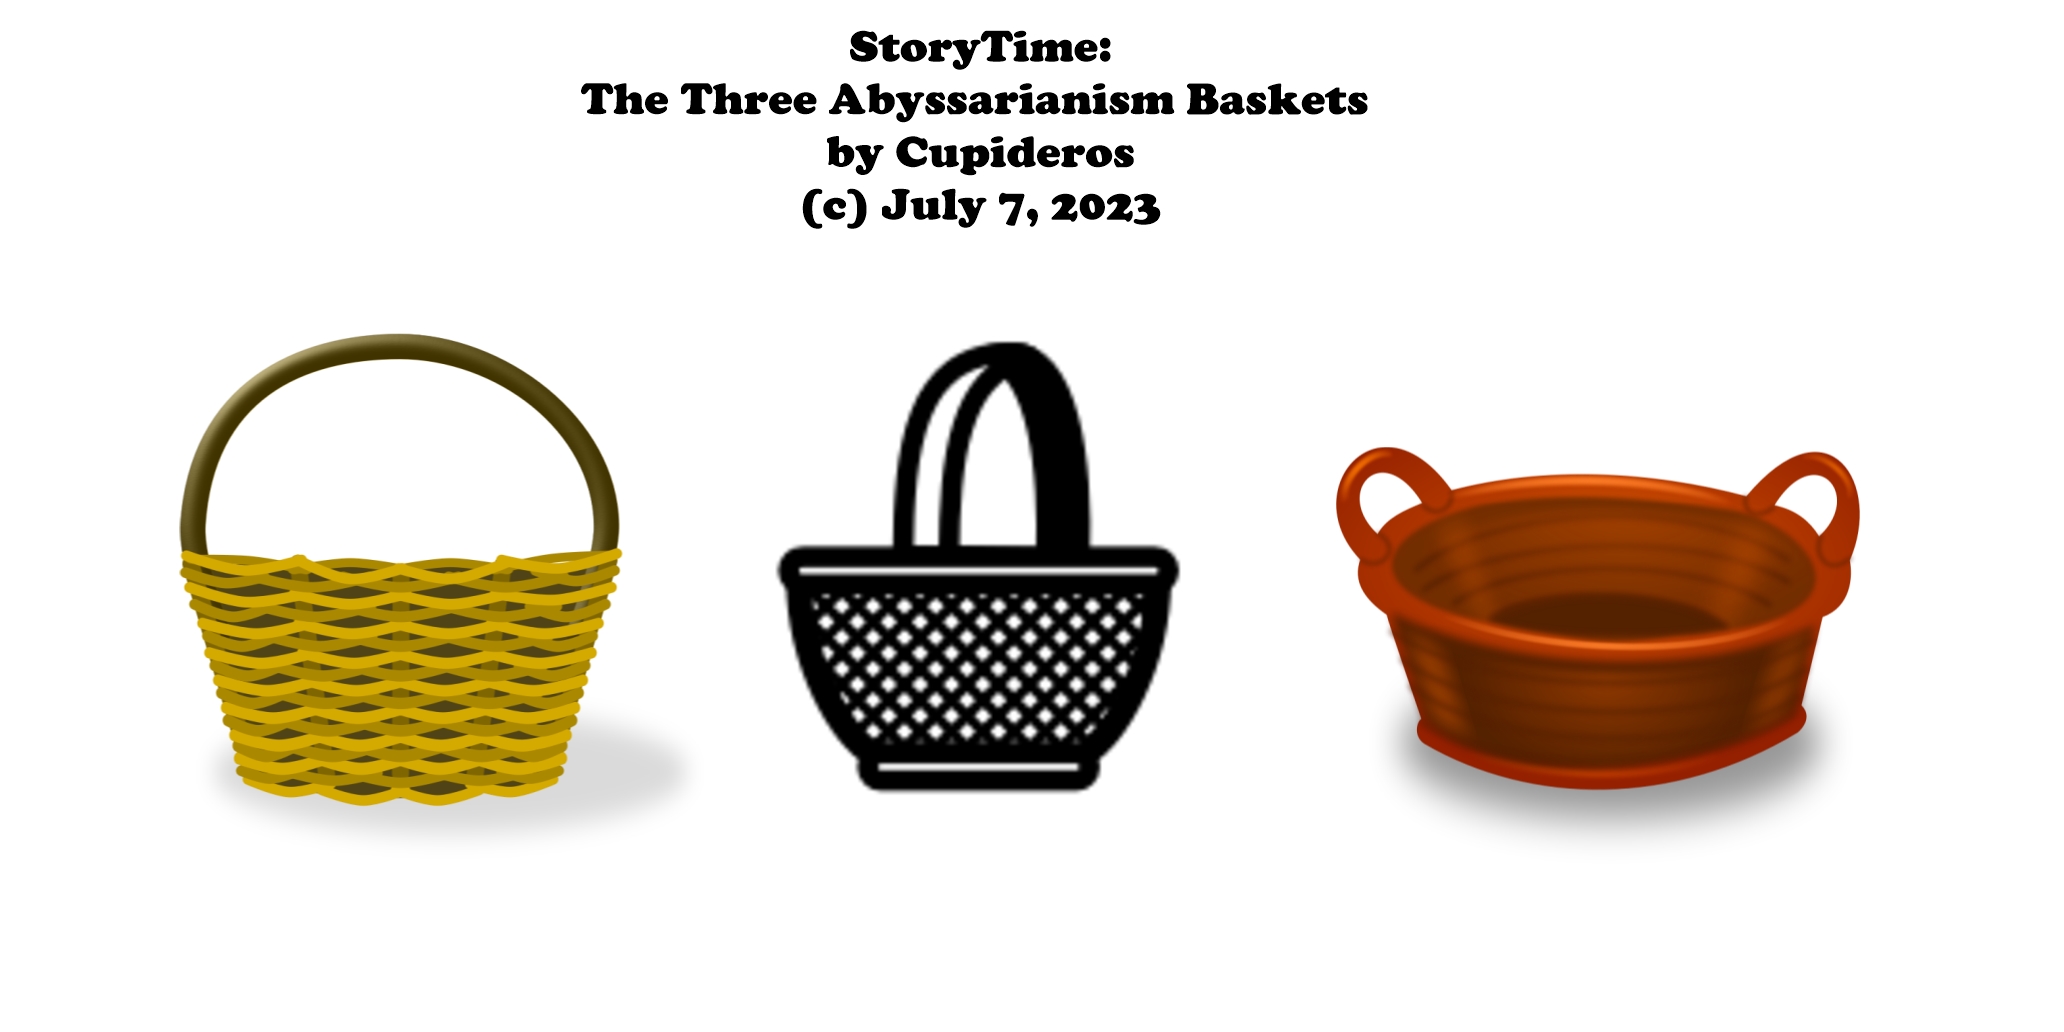 The Three Abyssarianism Baskets by Cupideros